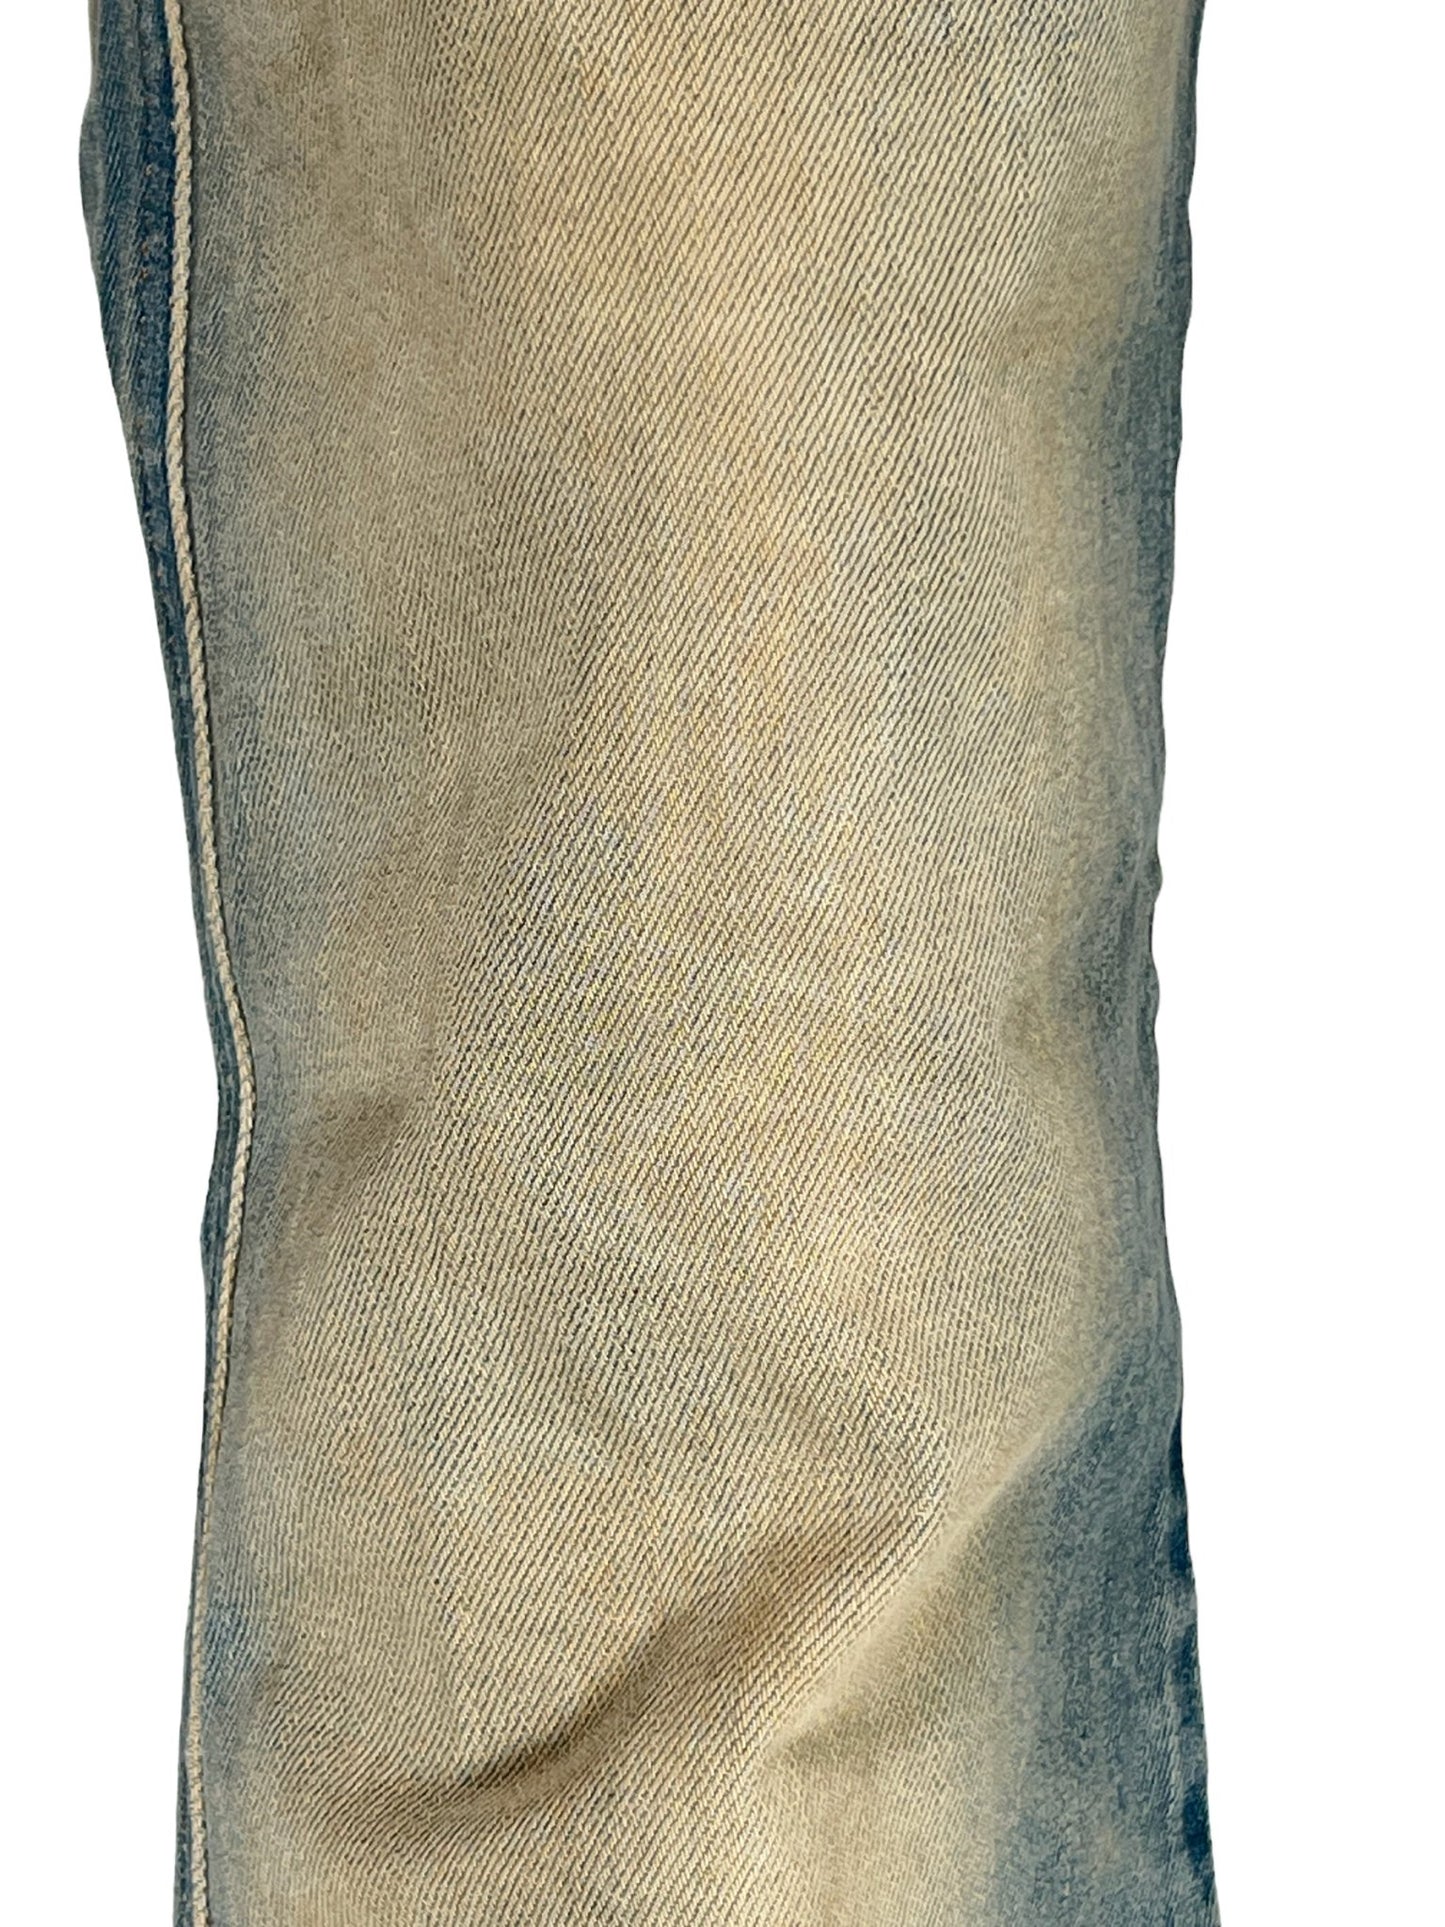 Close-up of a worn DIESEL 1998 D-BUCK 9H78 bootcut jeans fabric with fading colors.